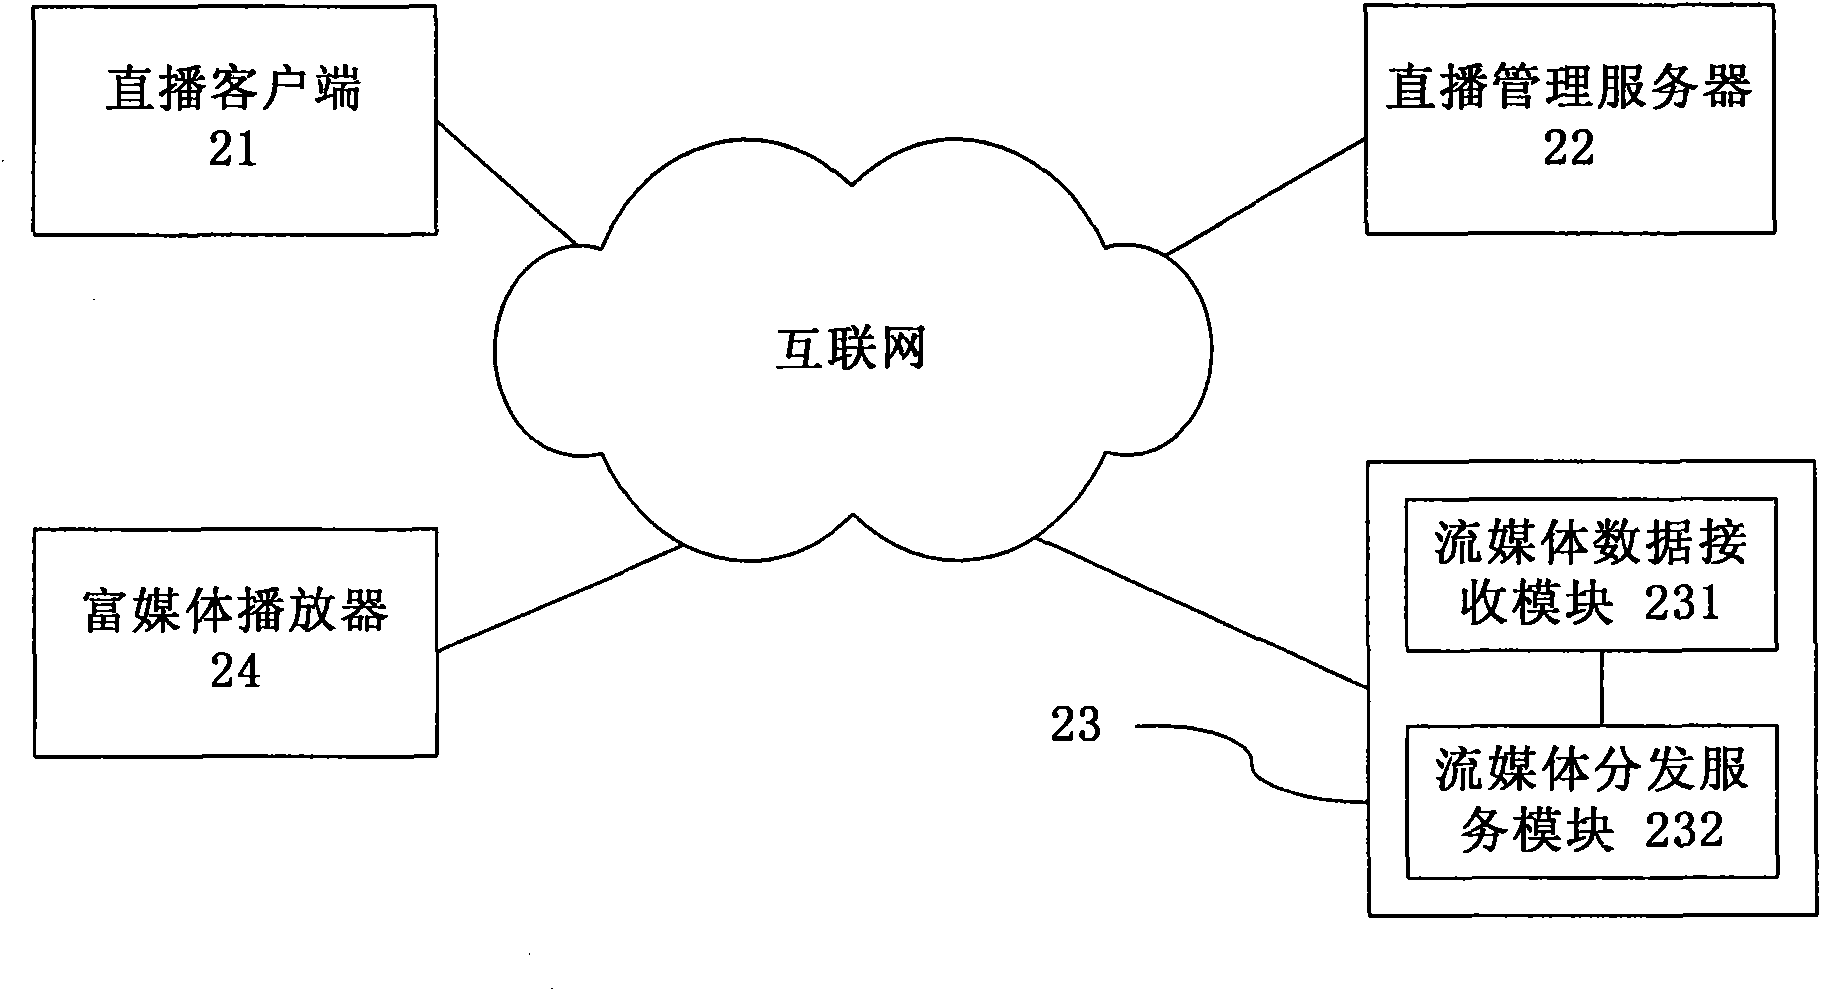 Rich media direct broadcasting business system and method